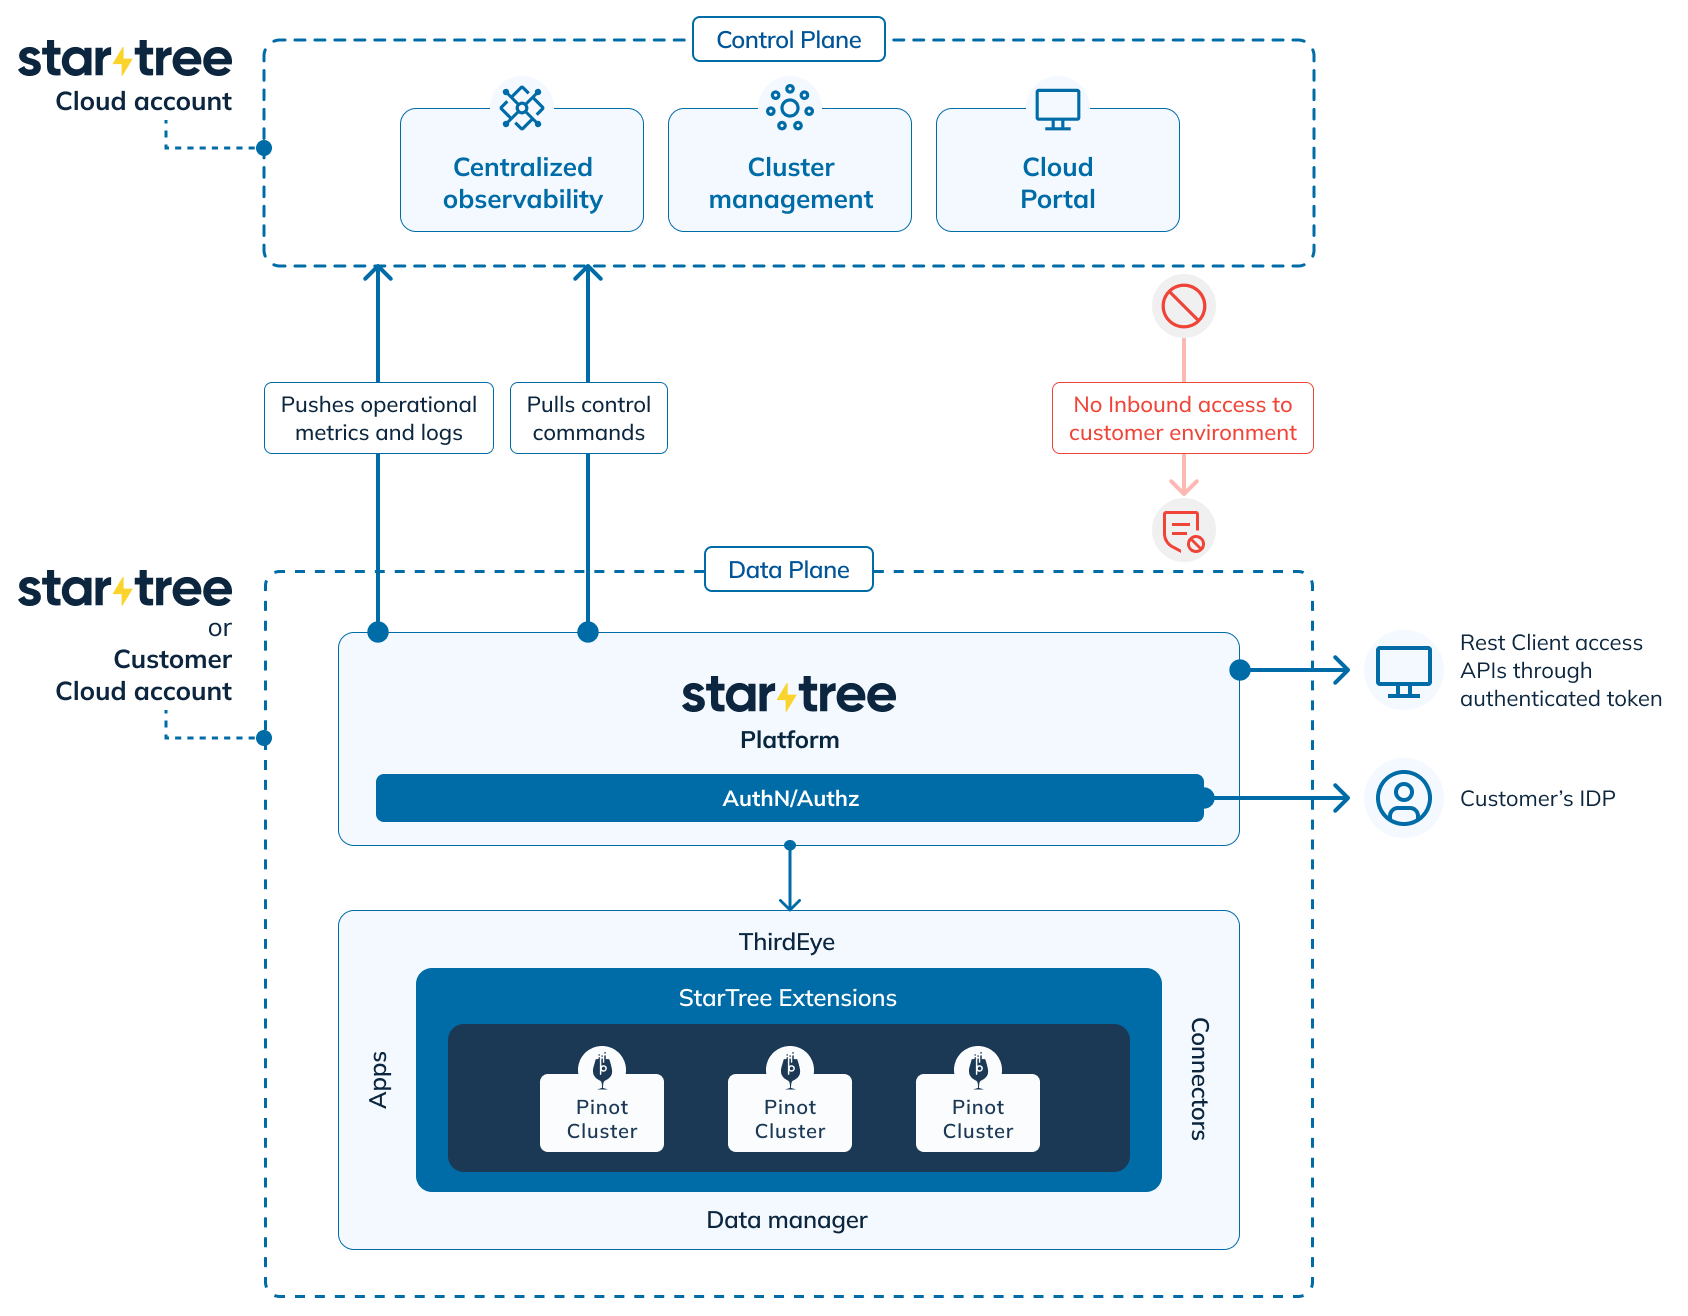 High level architecture of StarTree Cloud with Control and Data Plane